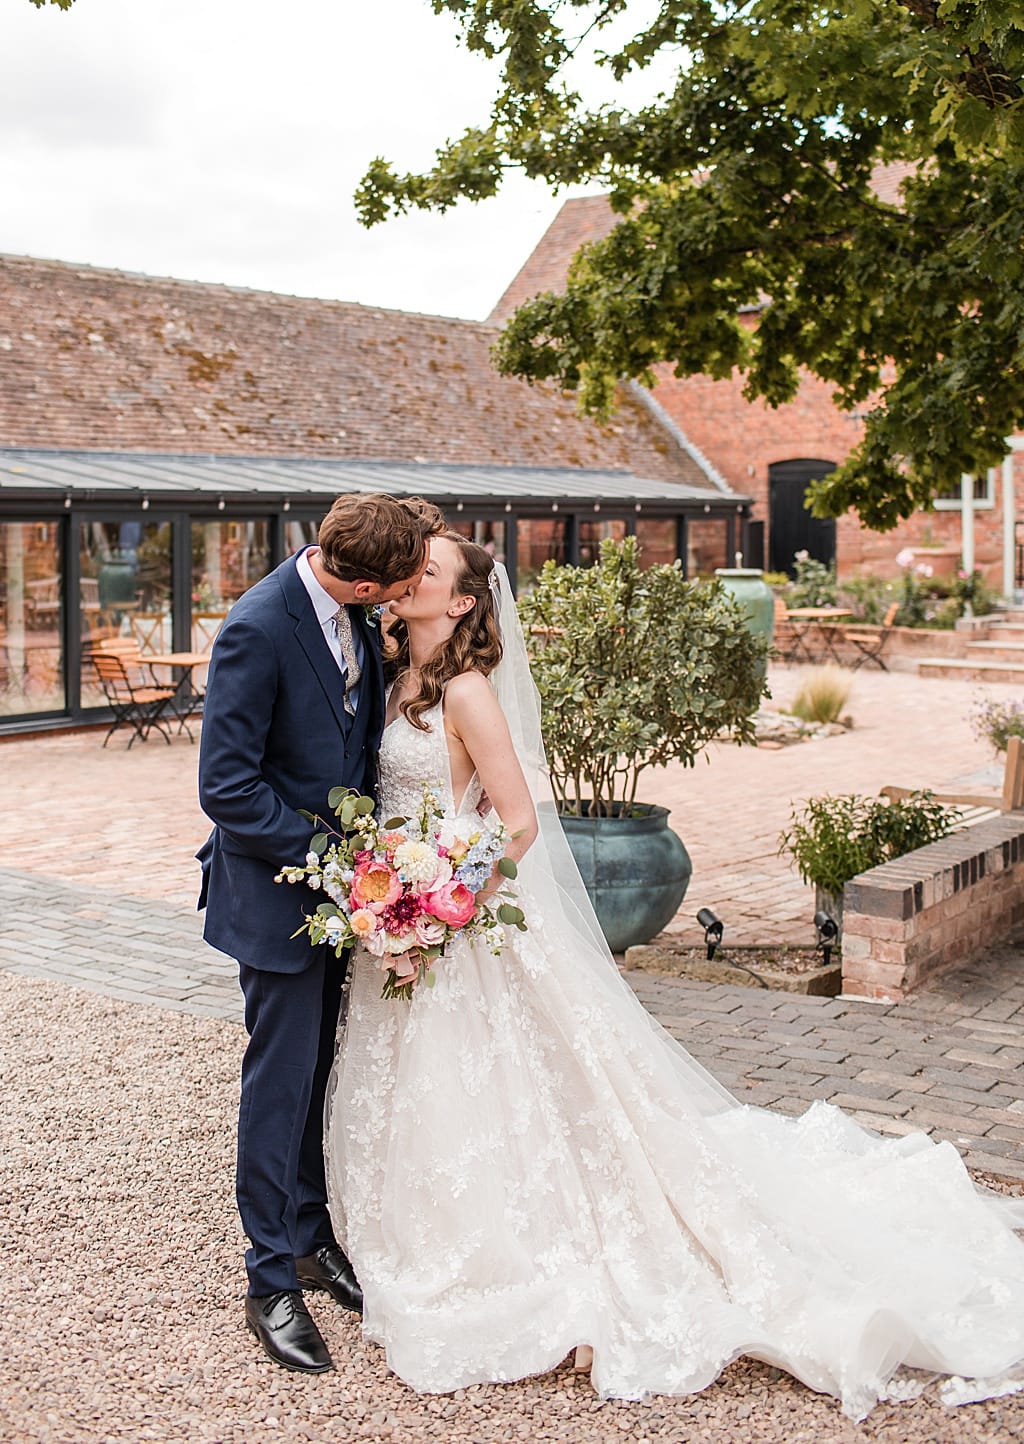 Bride and Groom stand kissing in the courtyard at Curradine Barns